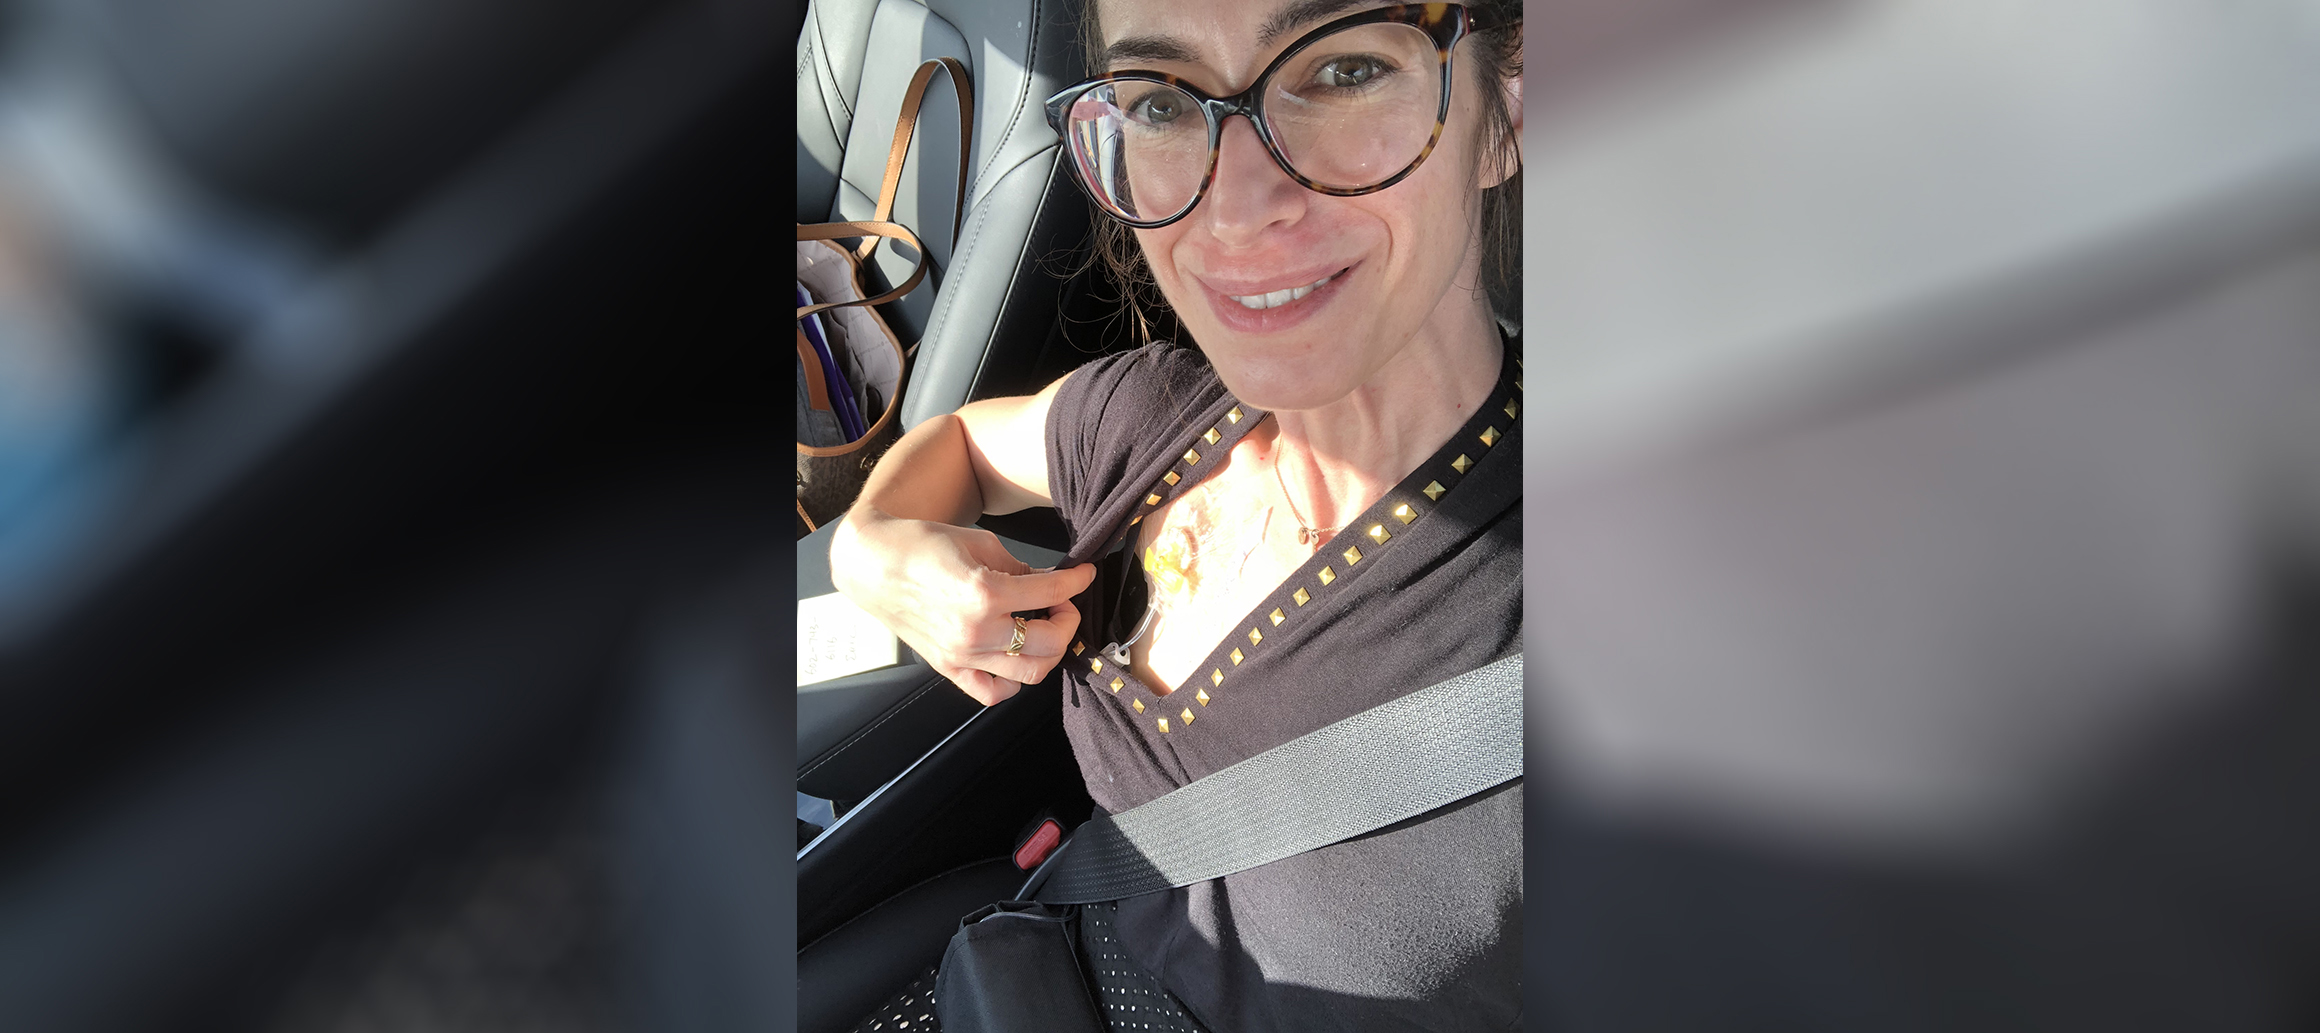 PHOTO: Dr. Lauren Juyia received chemotherapy treatment for colorectal cancer through a port, near her right shoulder, as she shows in this selfie.